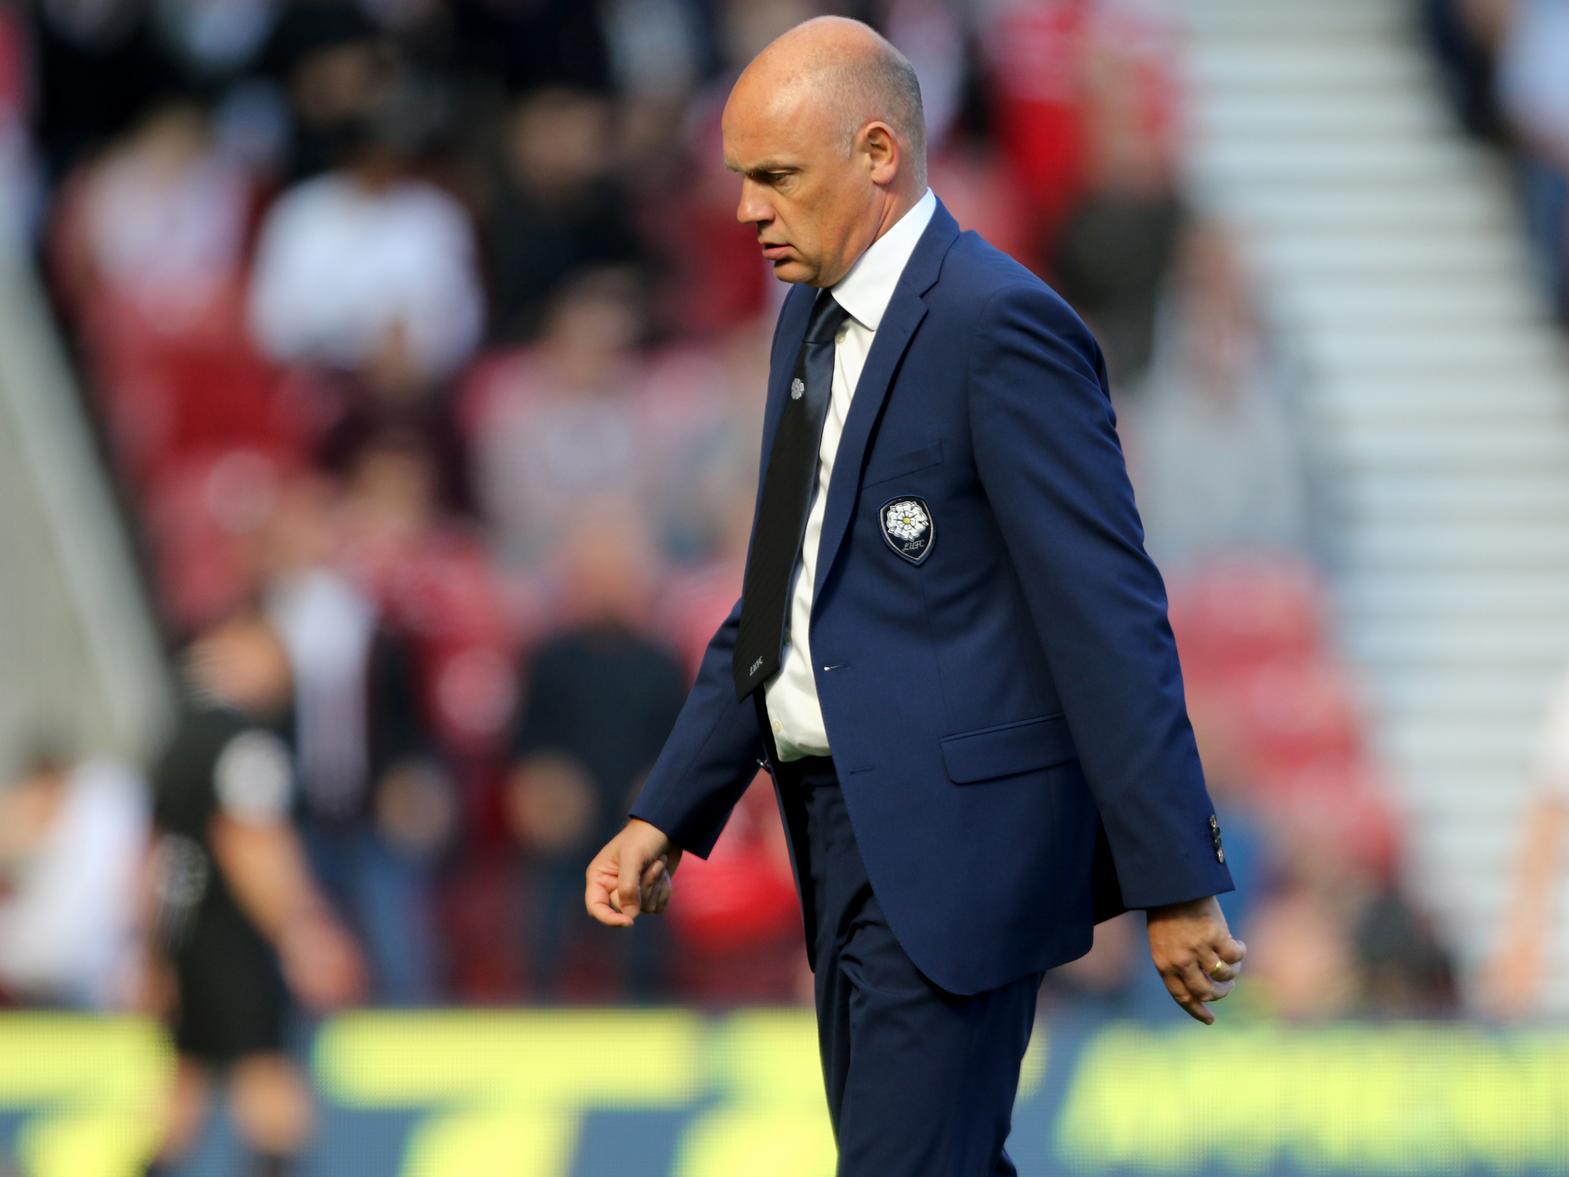 Another manager afforded little in the way of time. Rosler is currently in charge of Swedish champions Malm FF - he managed the side in a Europa League tie against Chelsea last season, you may remember former Leeds defender and Malmo fanatic Pontus Jansson led the chants as part of the travelling support at Stamford Bridge.